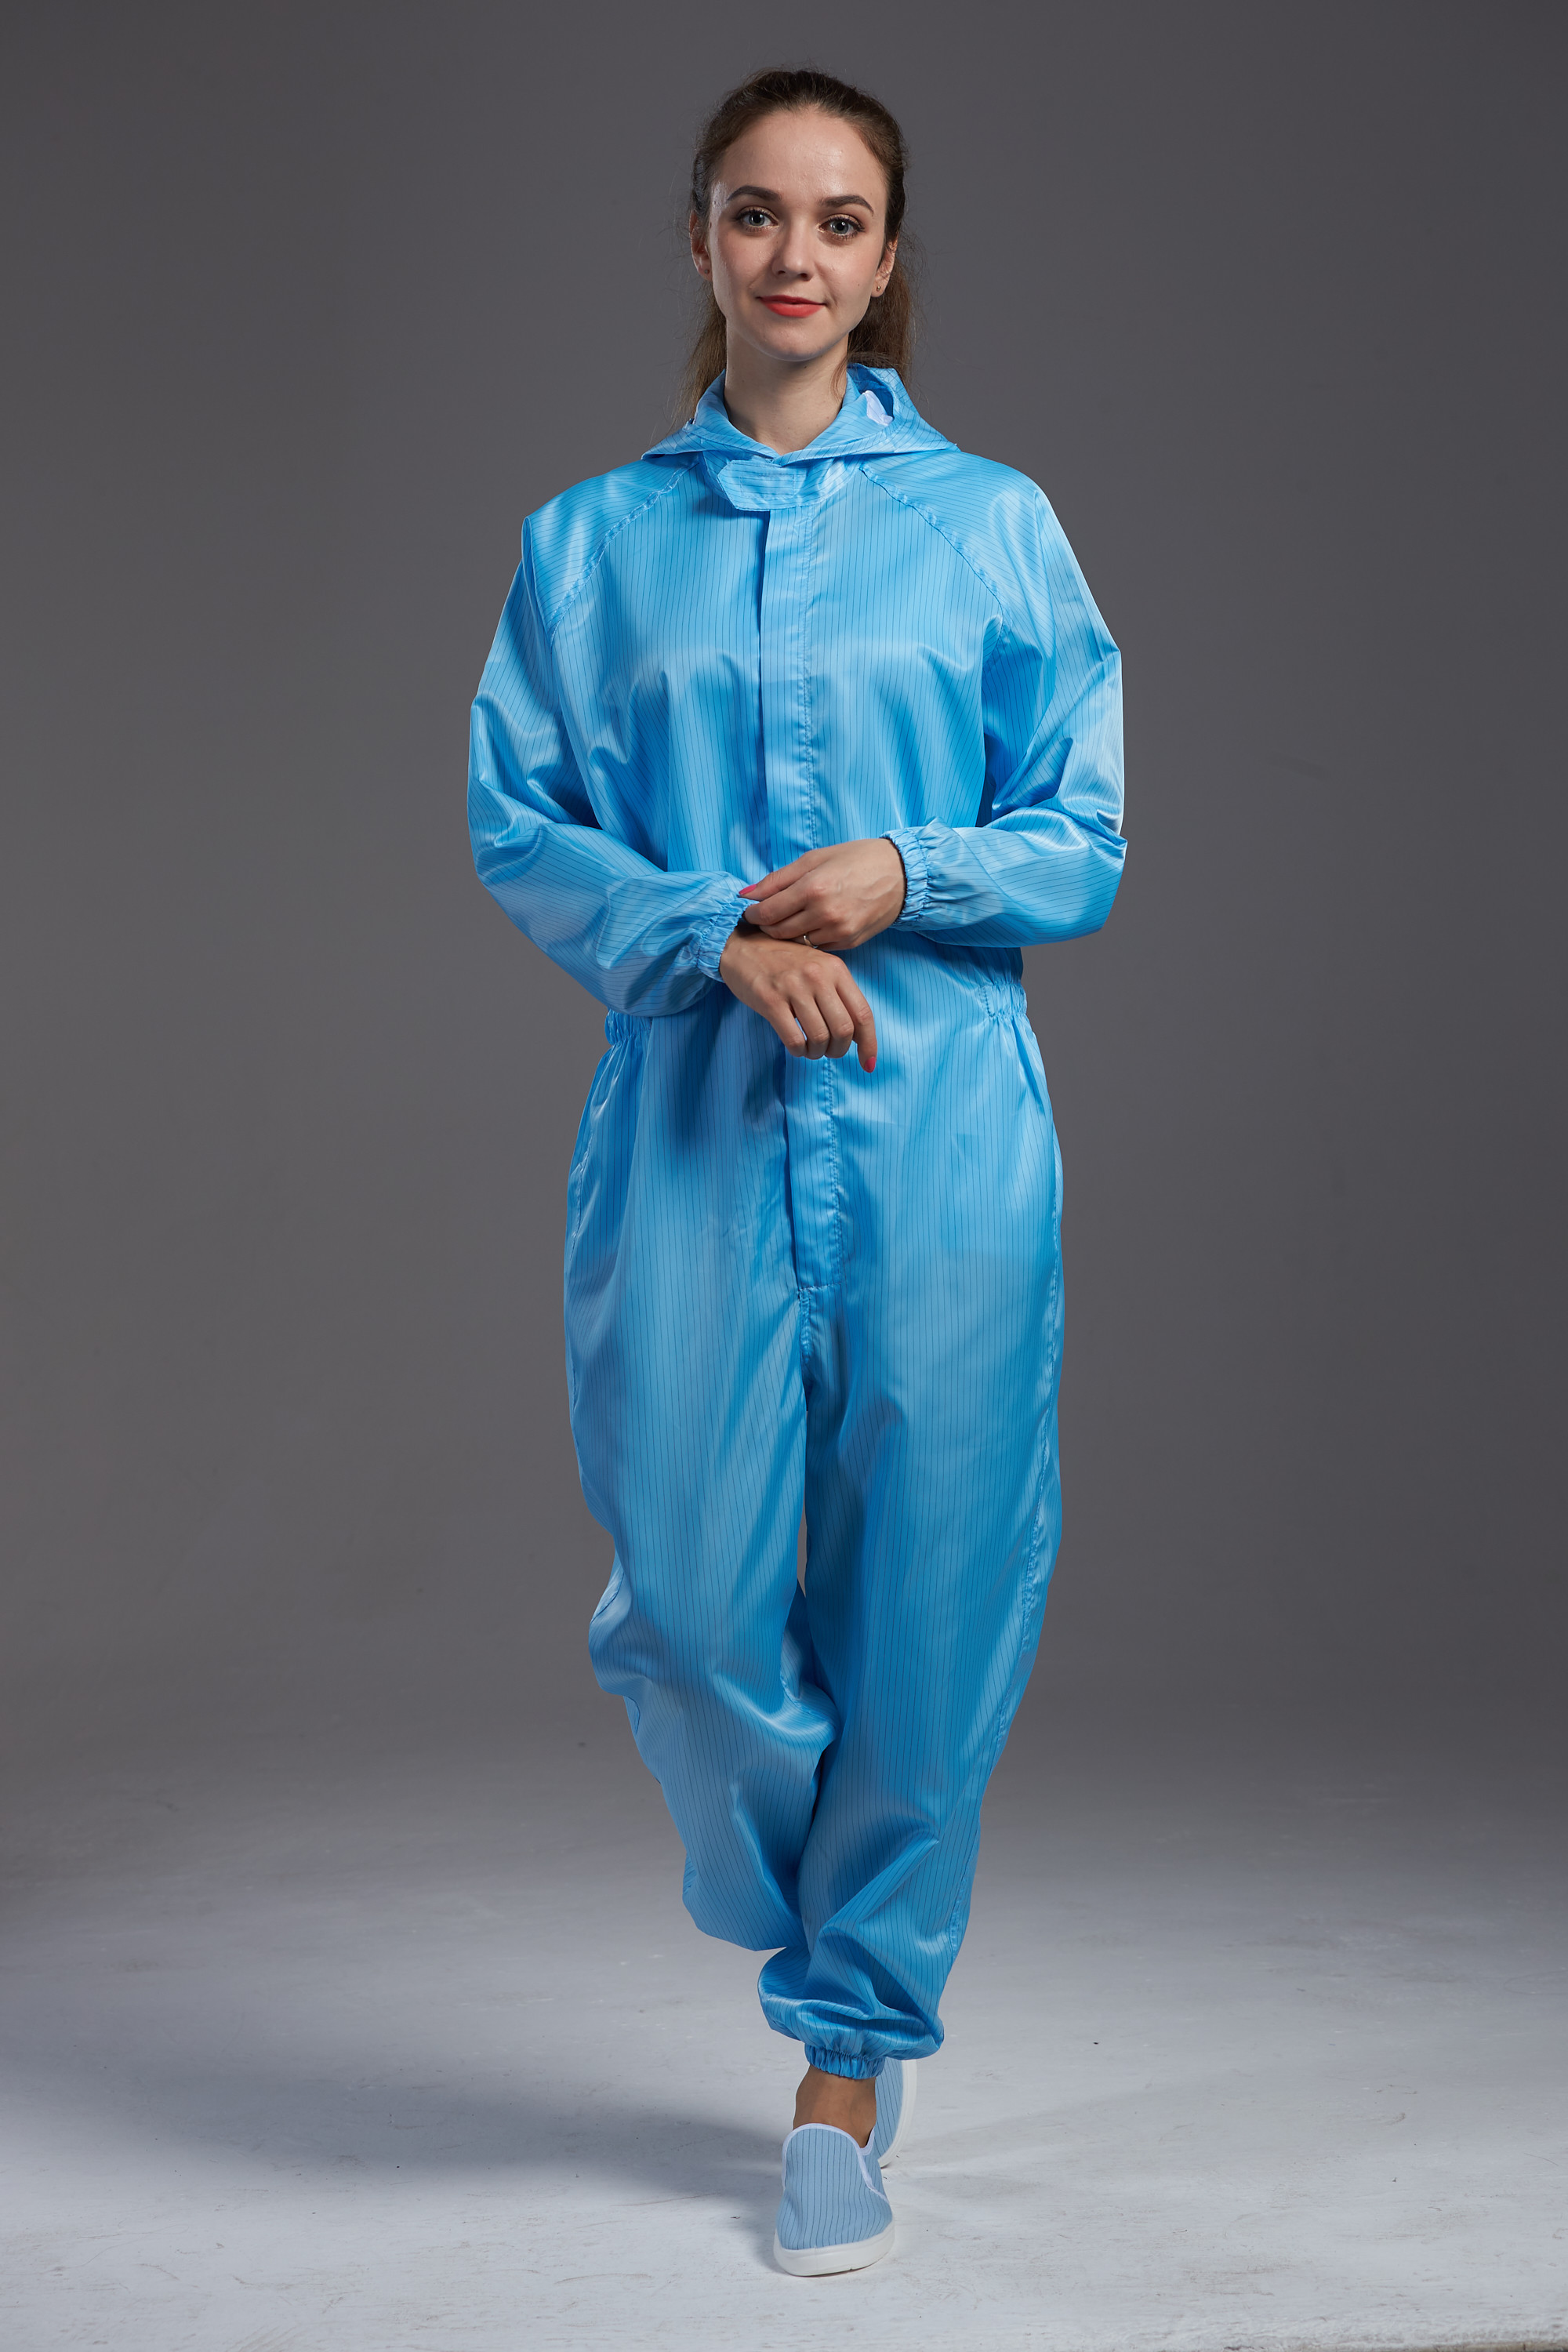 Best Autoclaved Dust Proof Overalls Reusable Gown Humanized Design For SMT Workshop wholesale